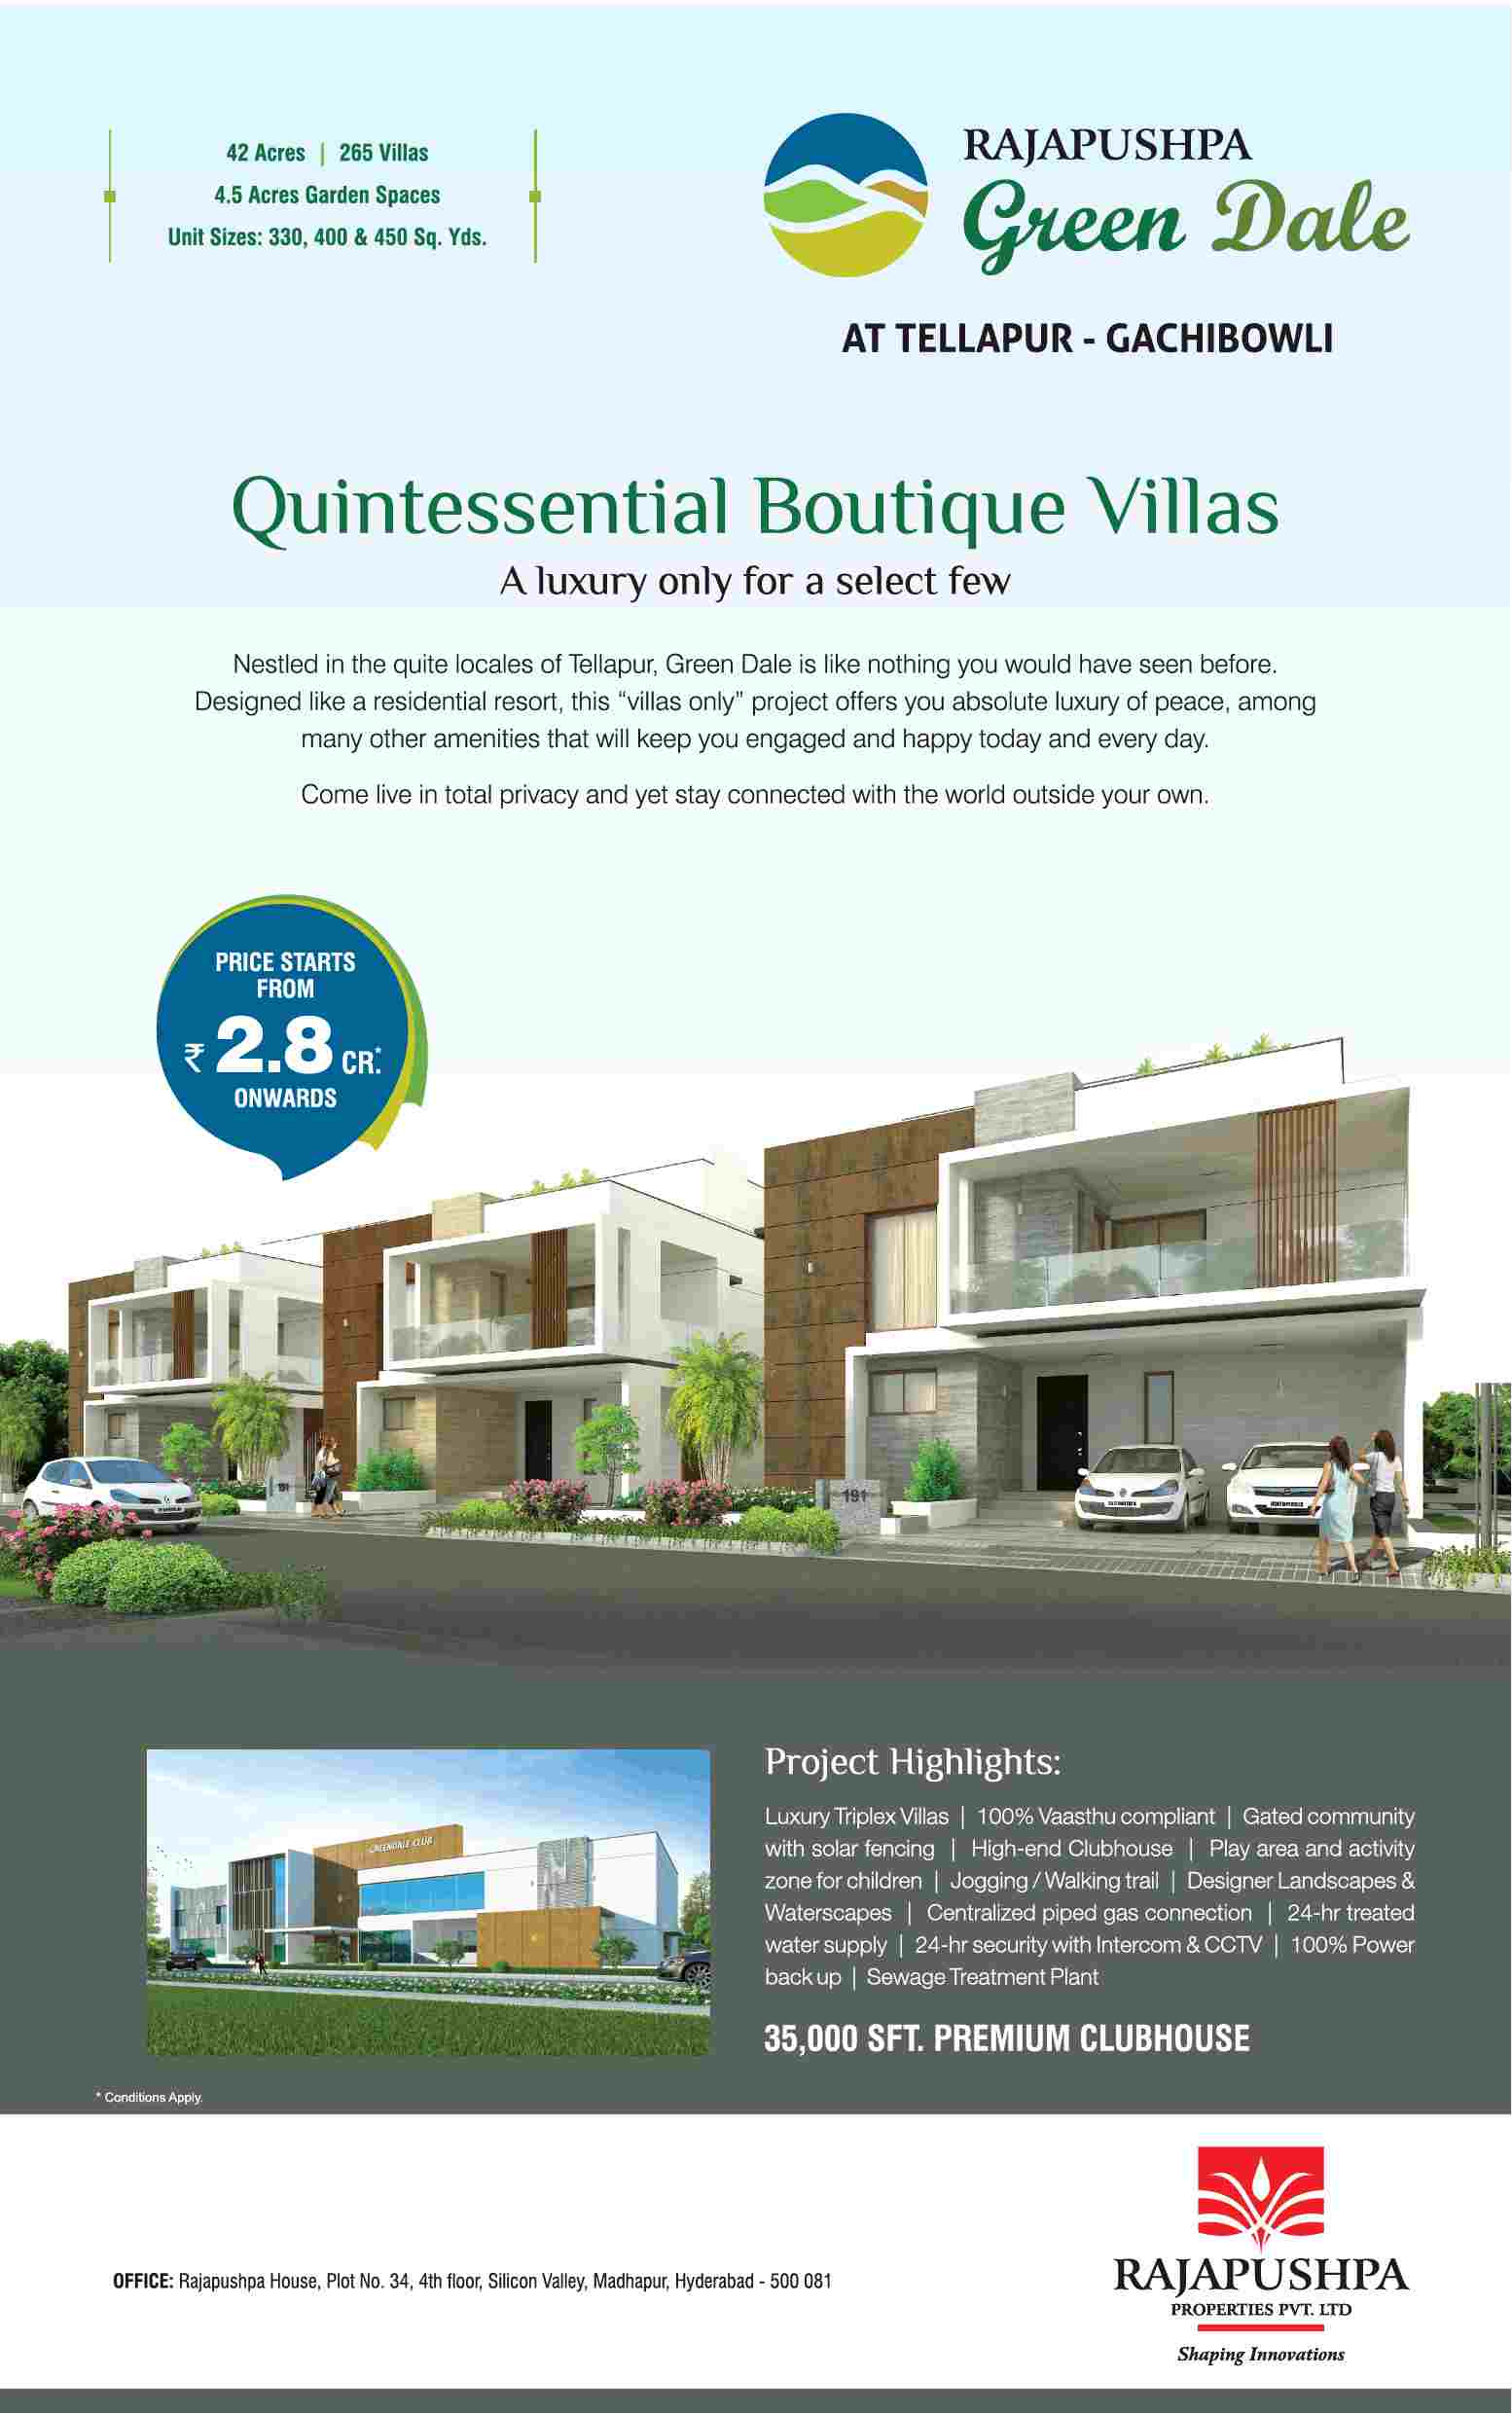 Reside in quintessential boutique villas at Rajapushpa Green dale in Hyderabad